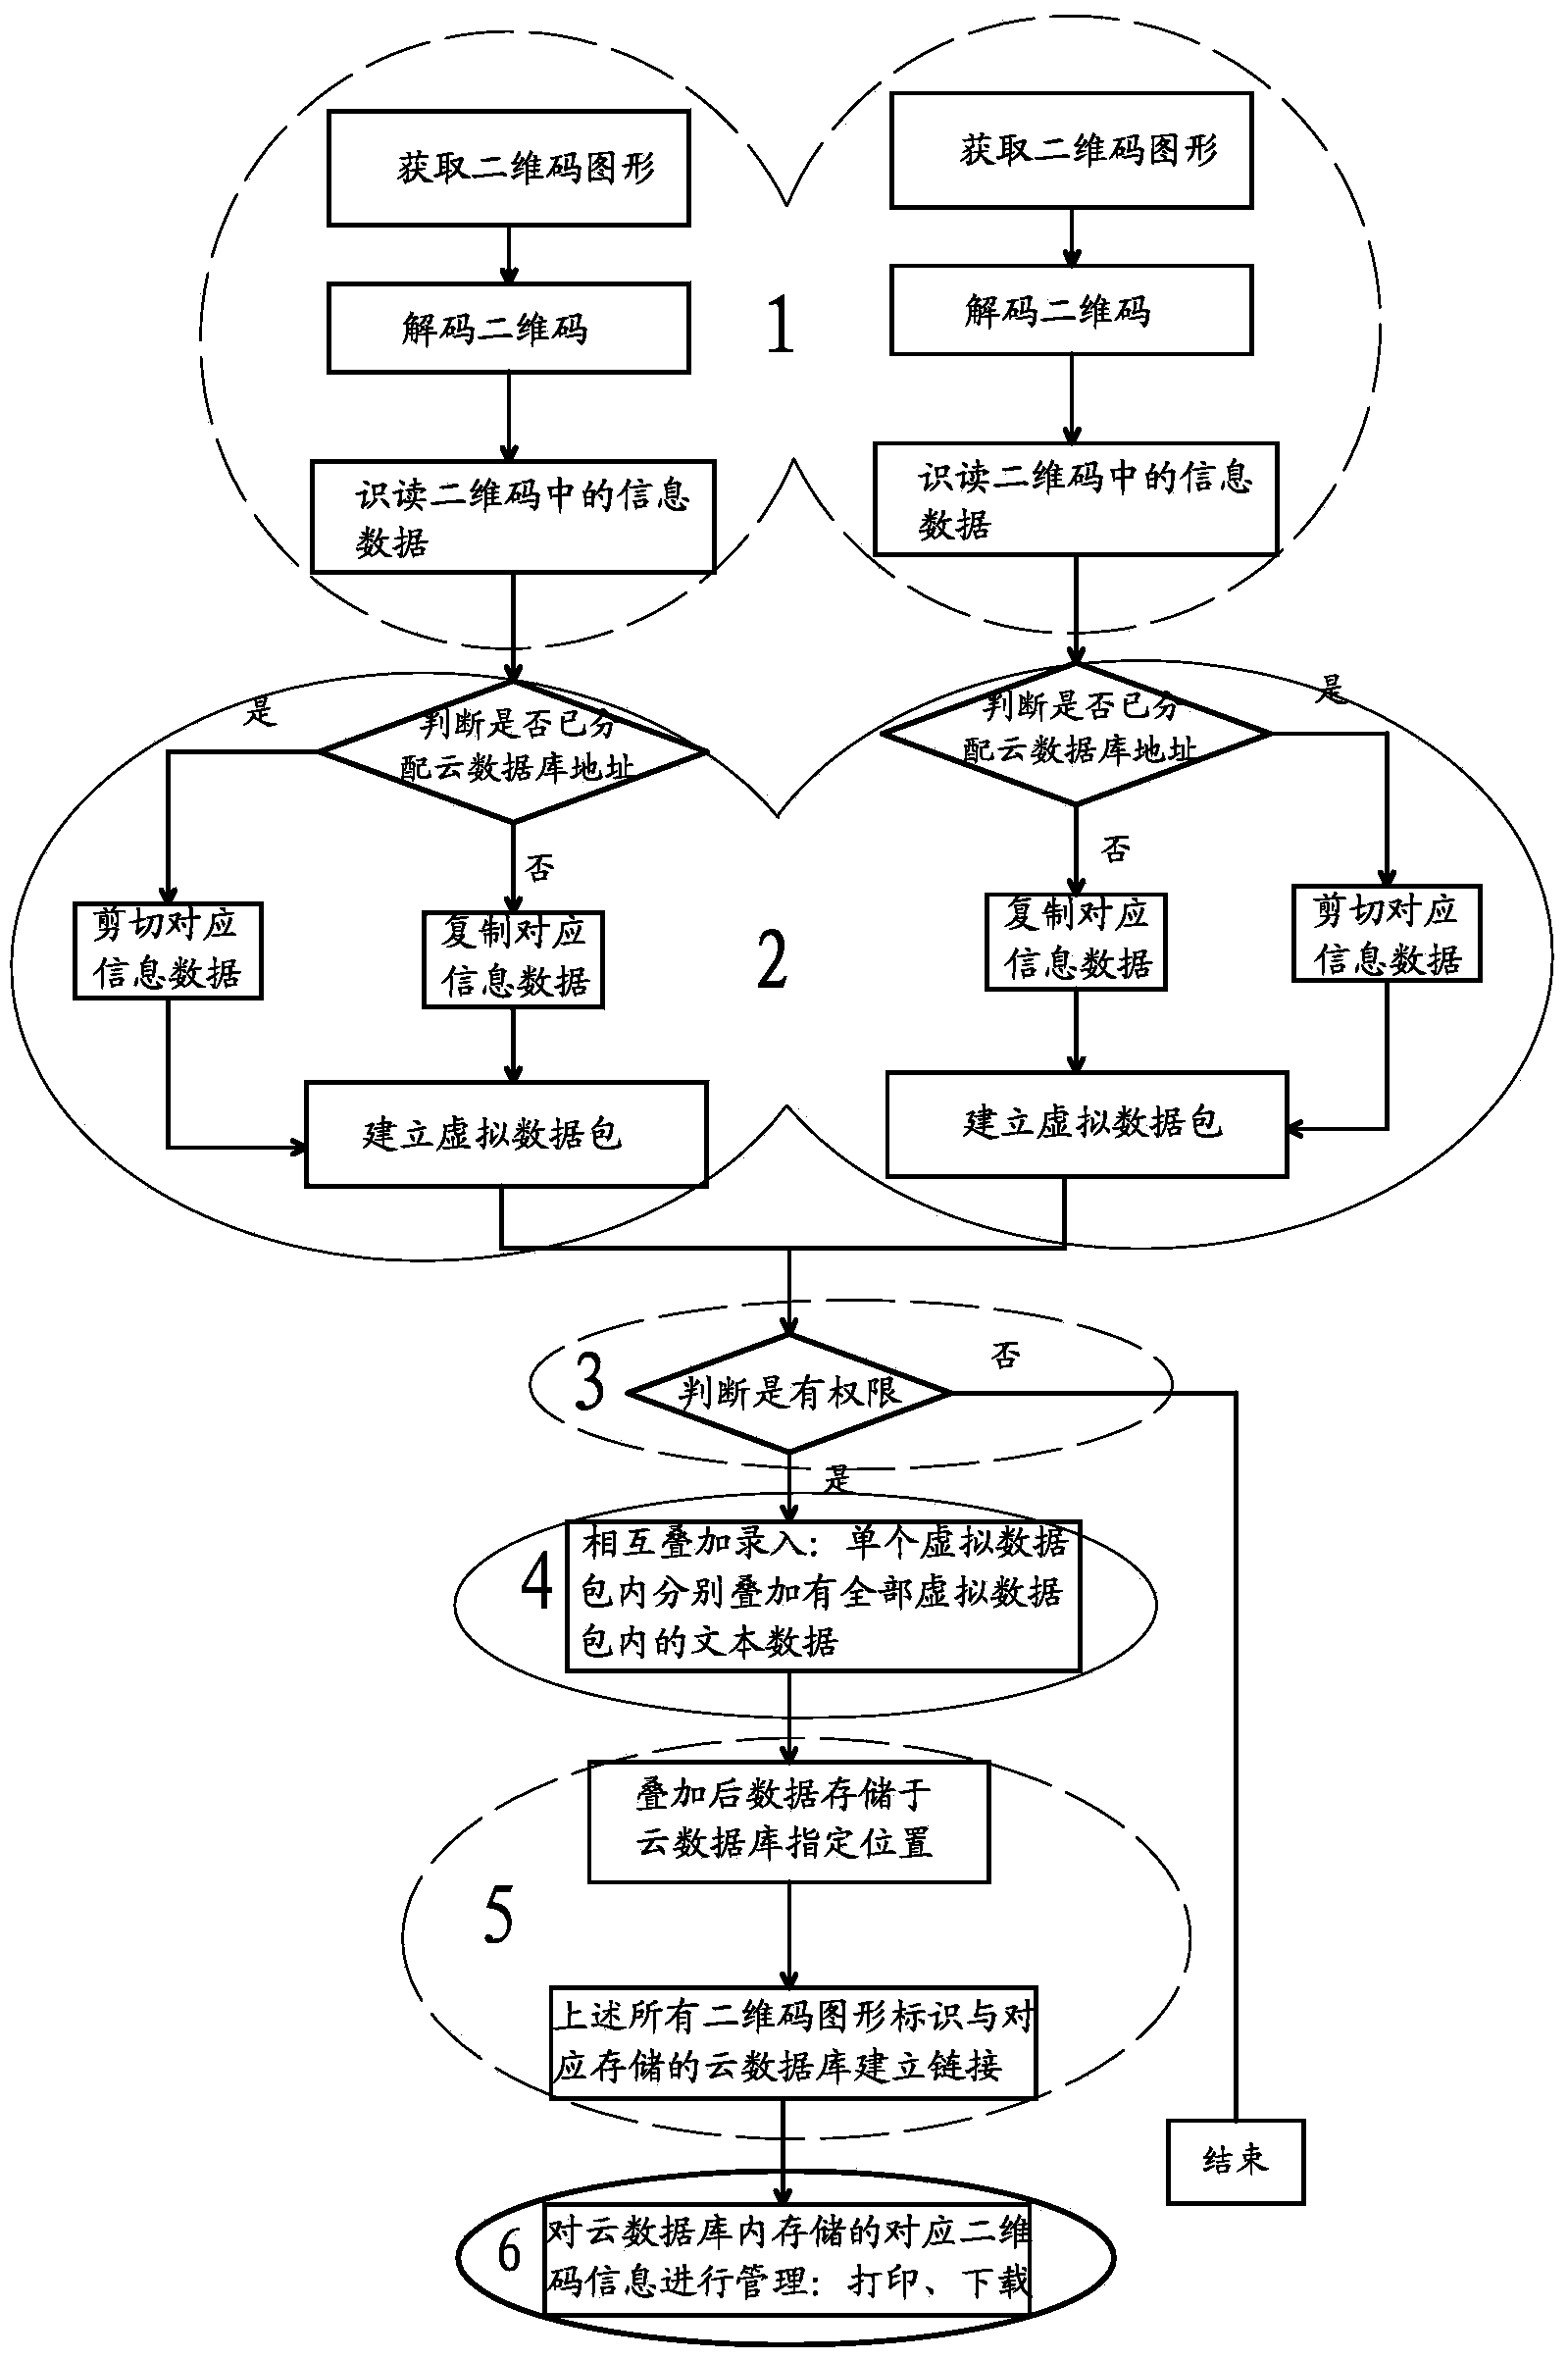 Method and system for superimposition inputting of two-dimensional code information data